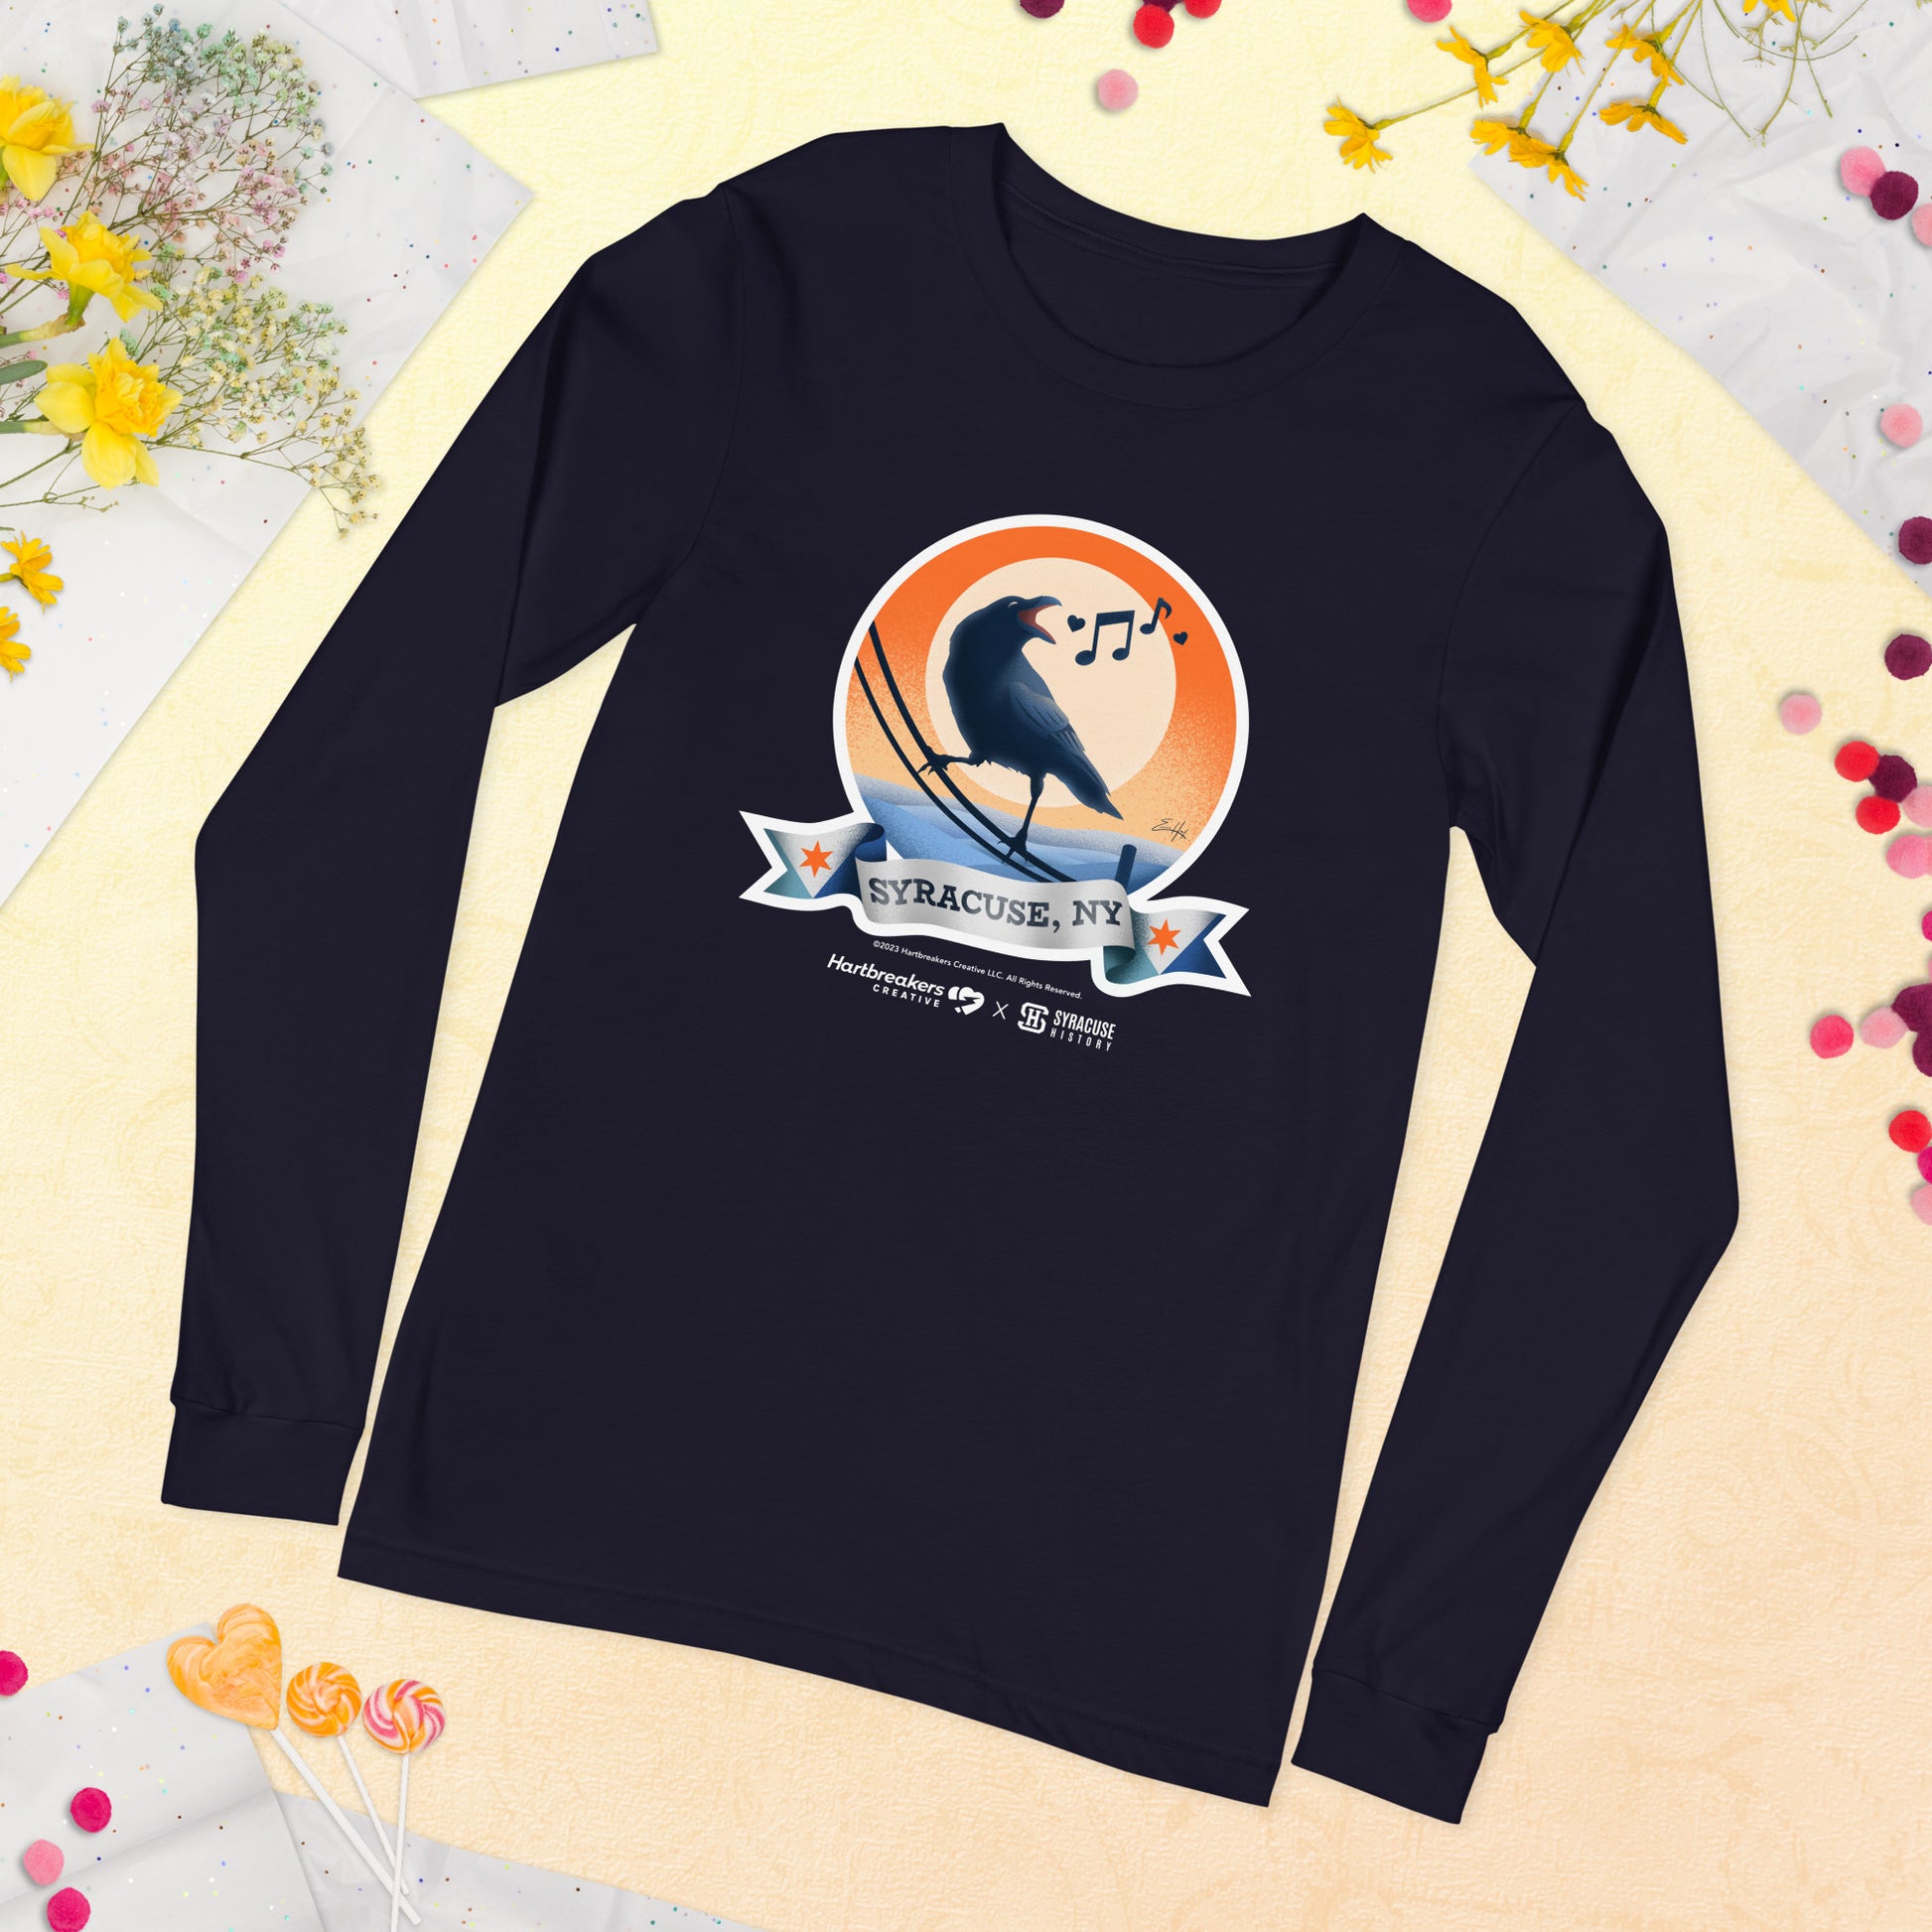 A navy long sleeve T-shirt featuring an illustration of a crow on a telephone wire and a banner beneath it that says Syracuse, NY